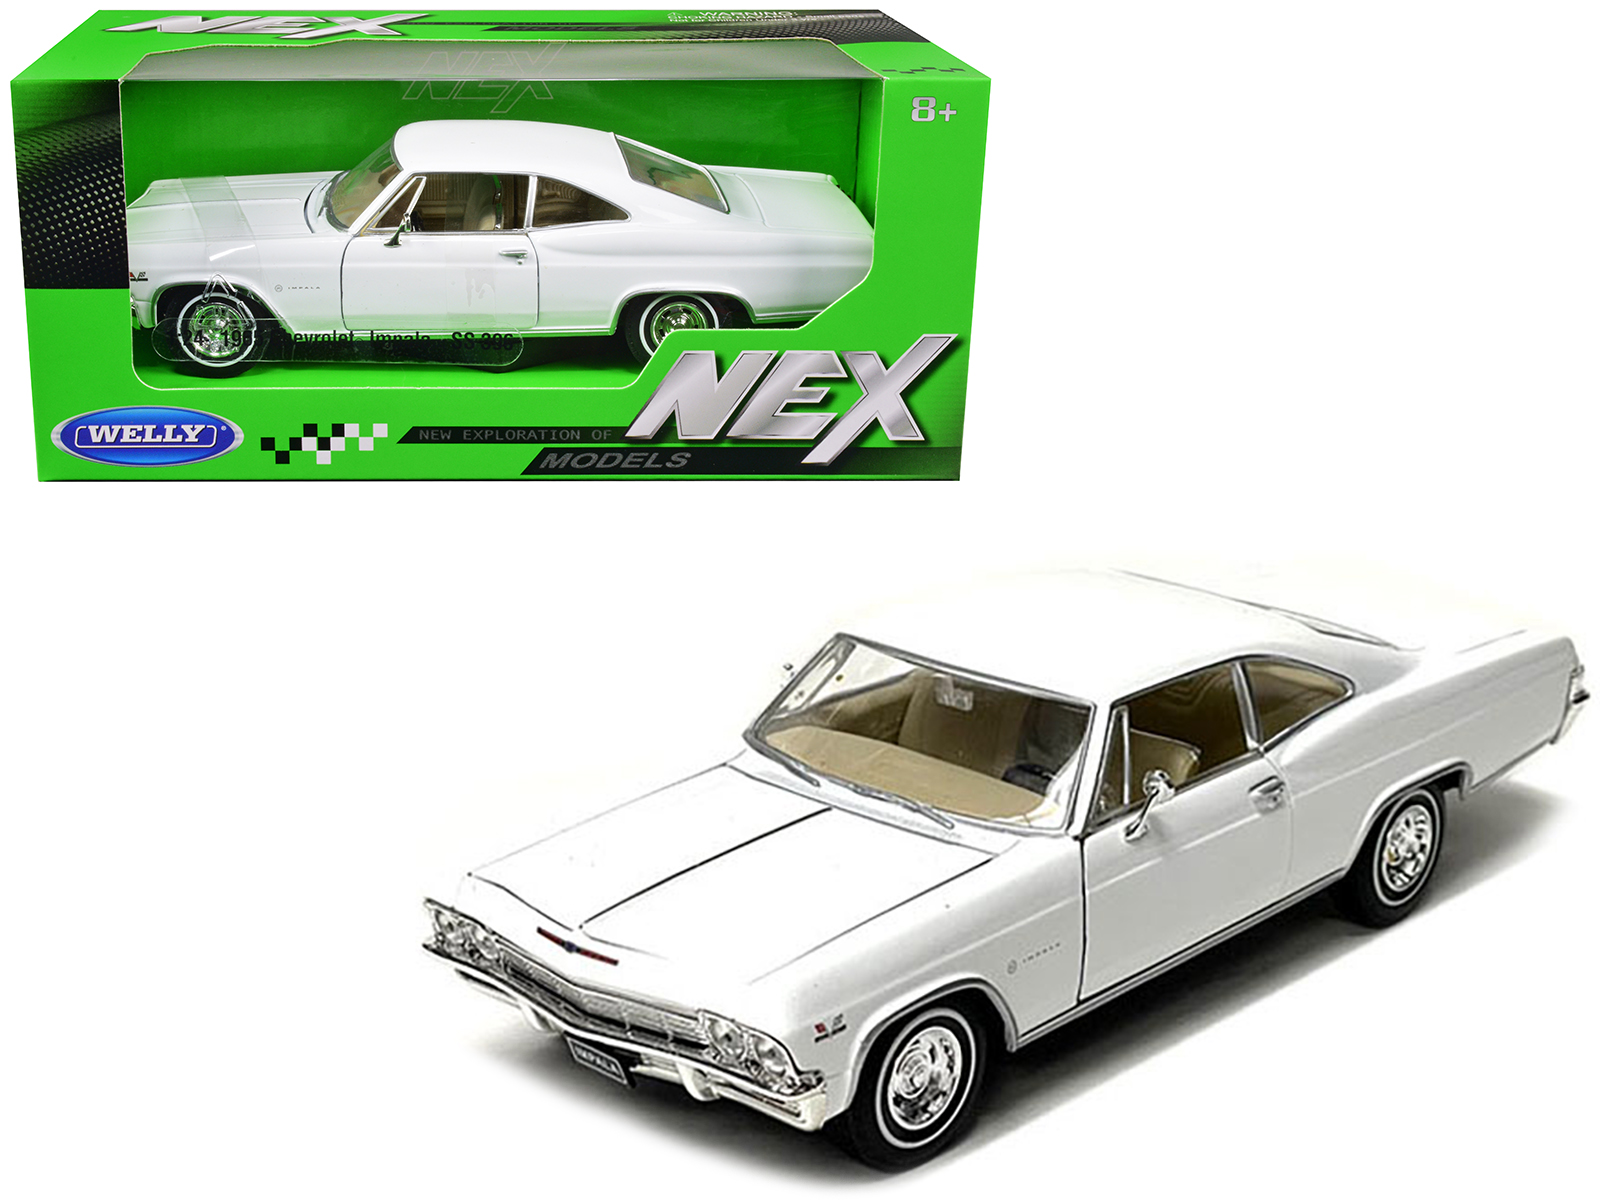 welly 1965 Chevrolet Impala SS 396 White "NEX Models" 1/24 Diecast Model Car by Welly